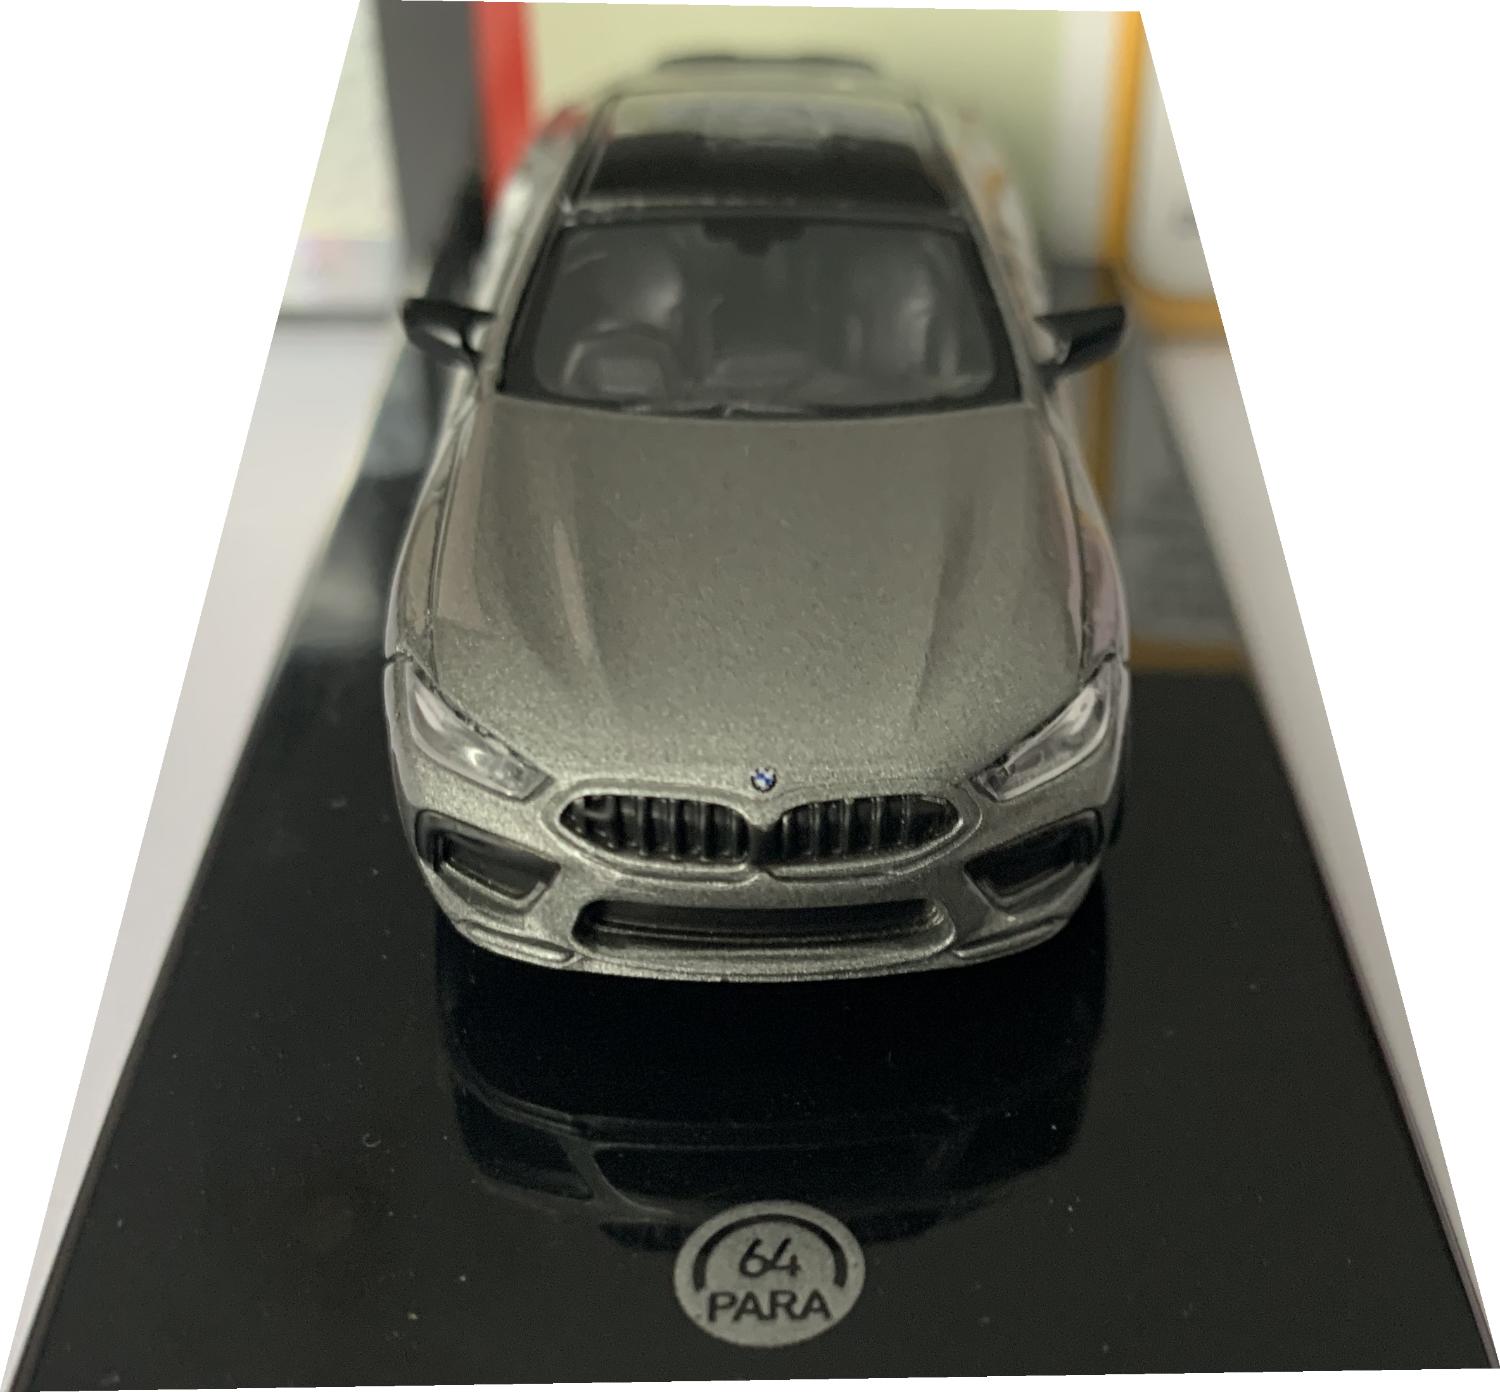 BMW M8 Coupe in donington grey 1:64 scale model from Paragon Models